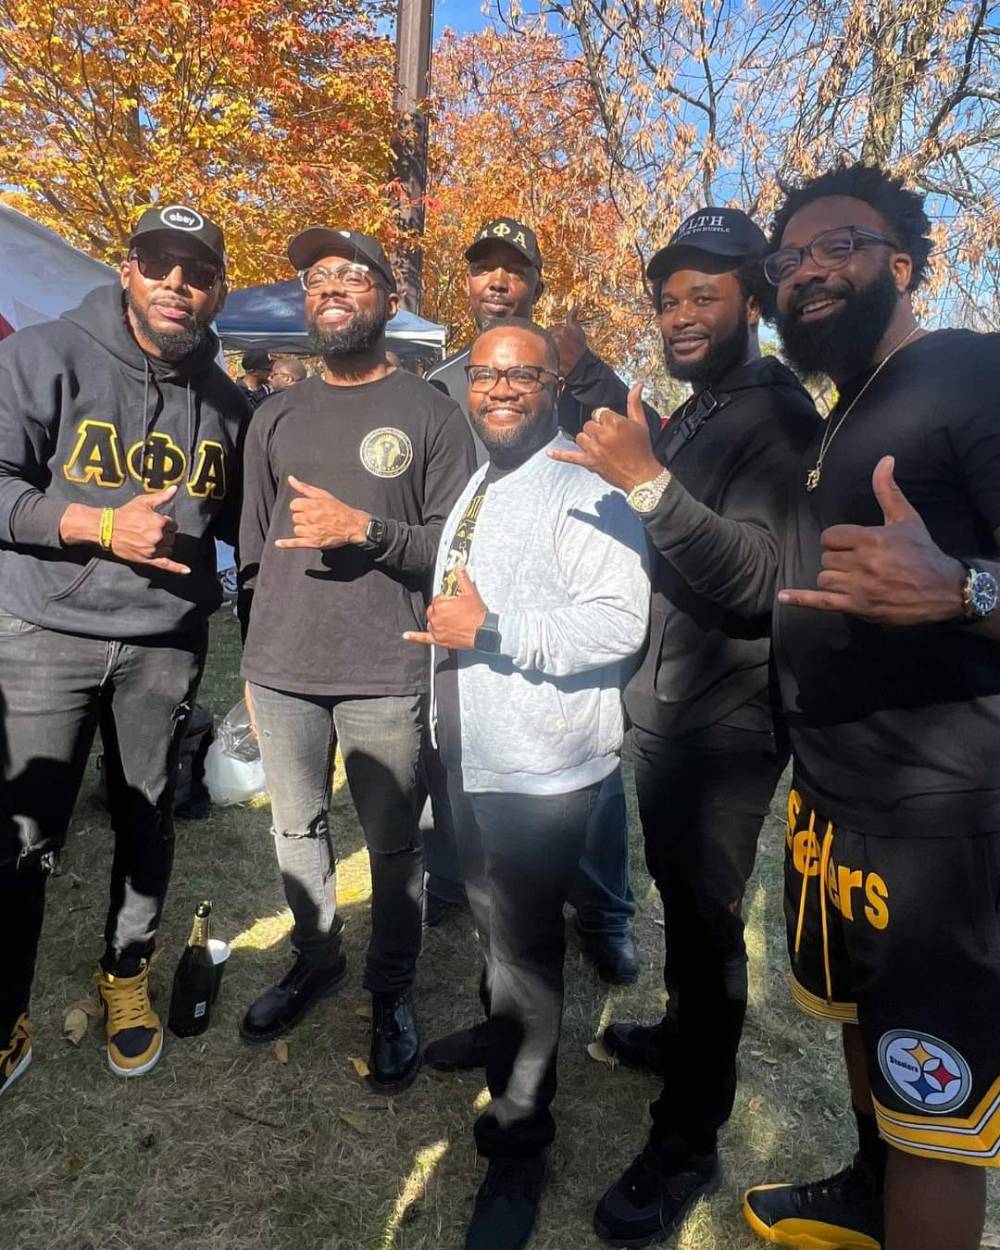 A group of alumni pose for a photo at the tailgate before the football game.